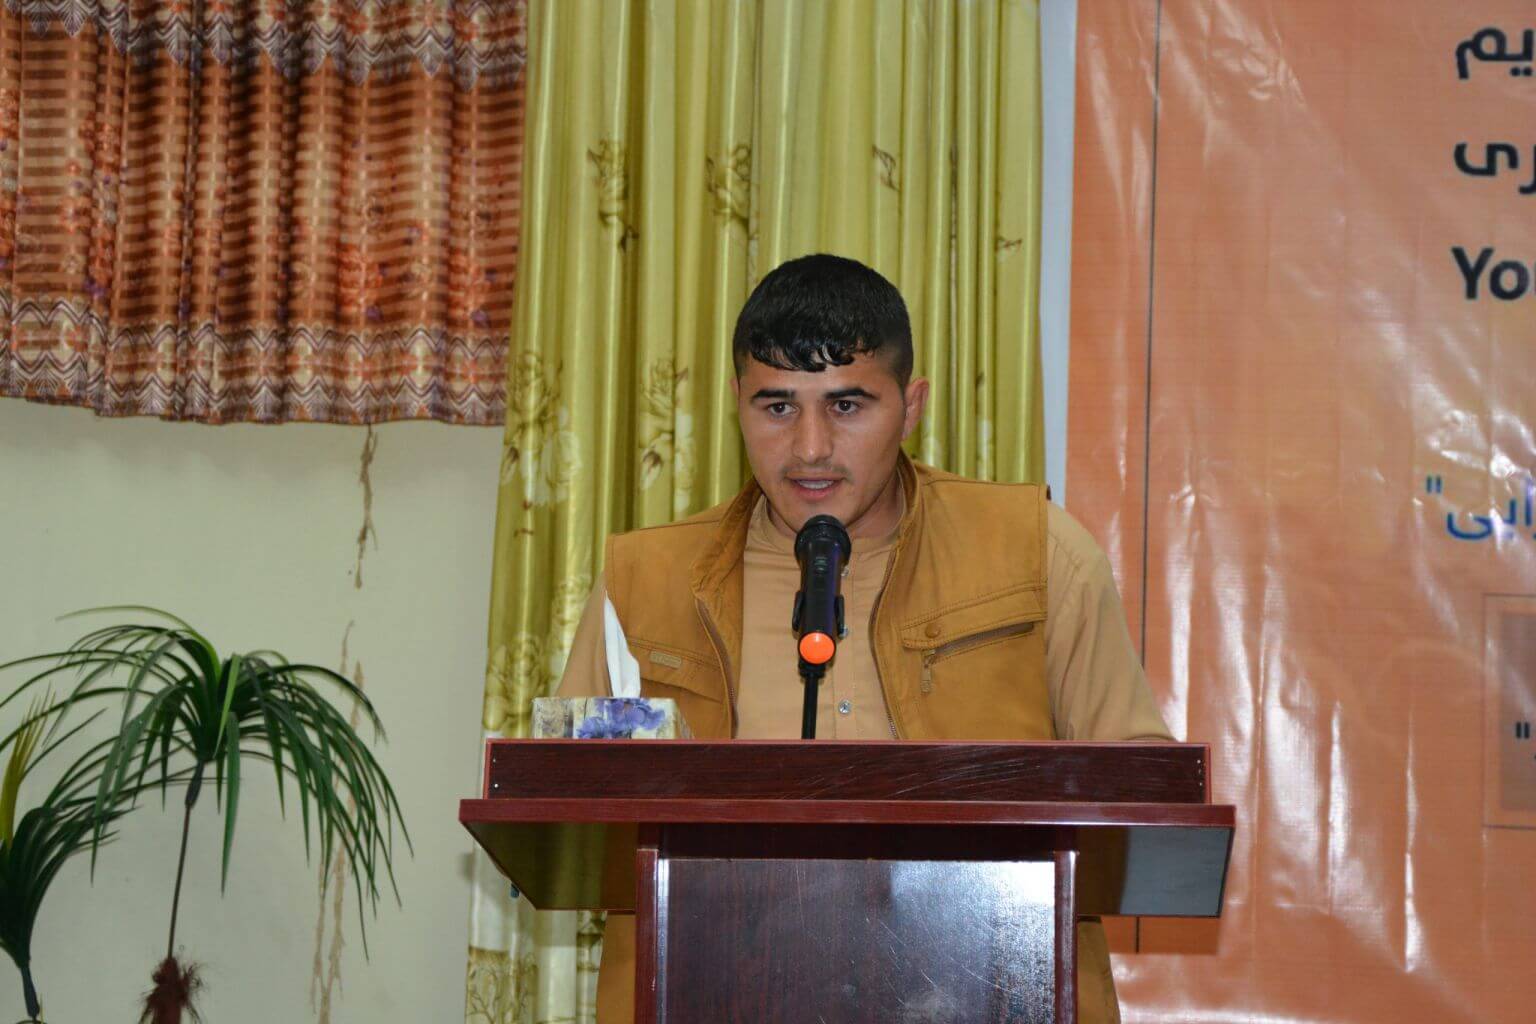 Rostum Jalalzai, one of the announcers of the programs...